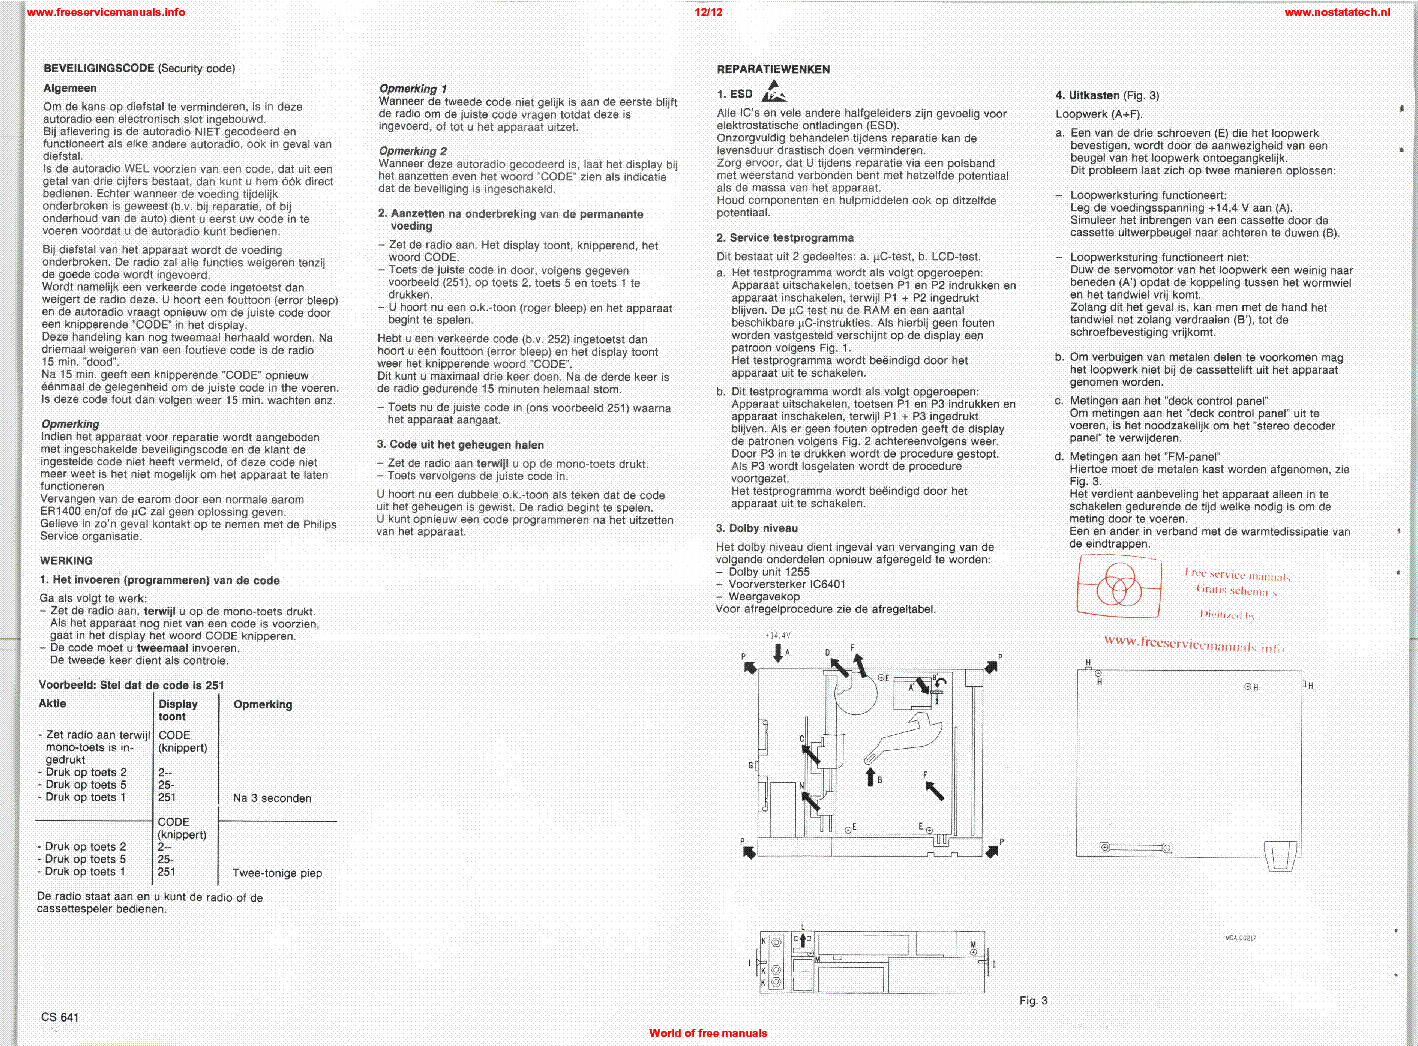 PHILIPS 22DC854 service manual (2nd page)